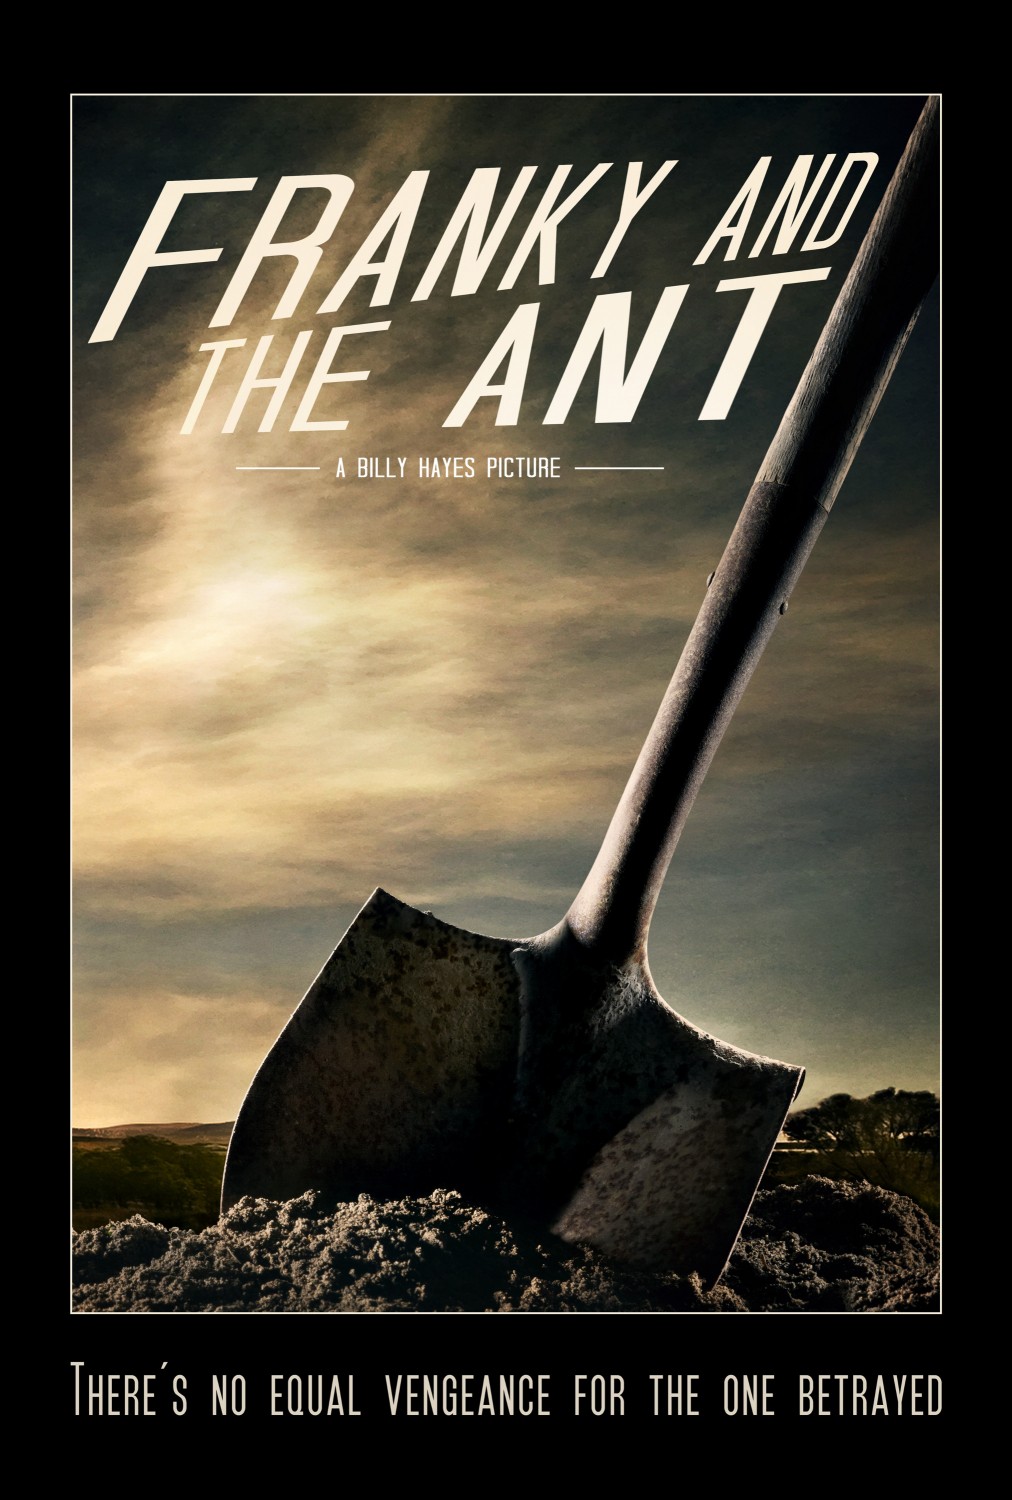 Extra Large Movie Poster Image for Franky and the Ant